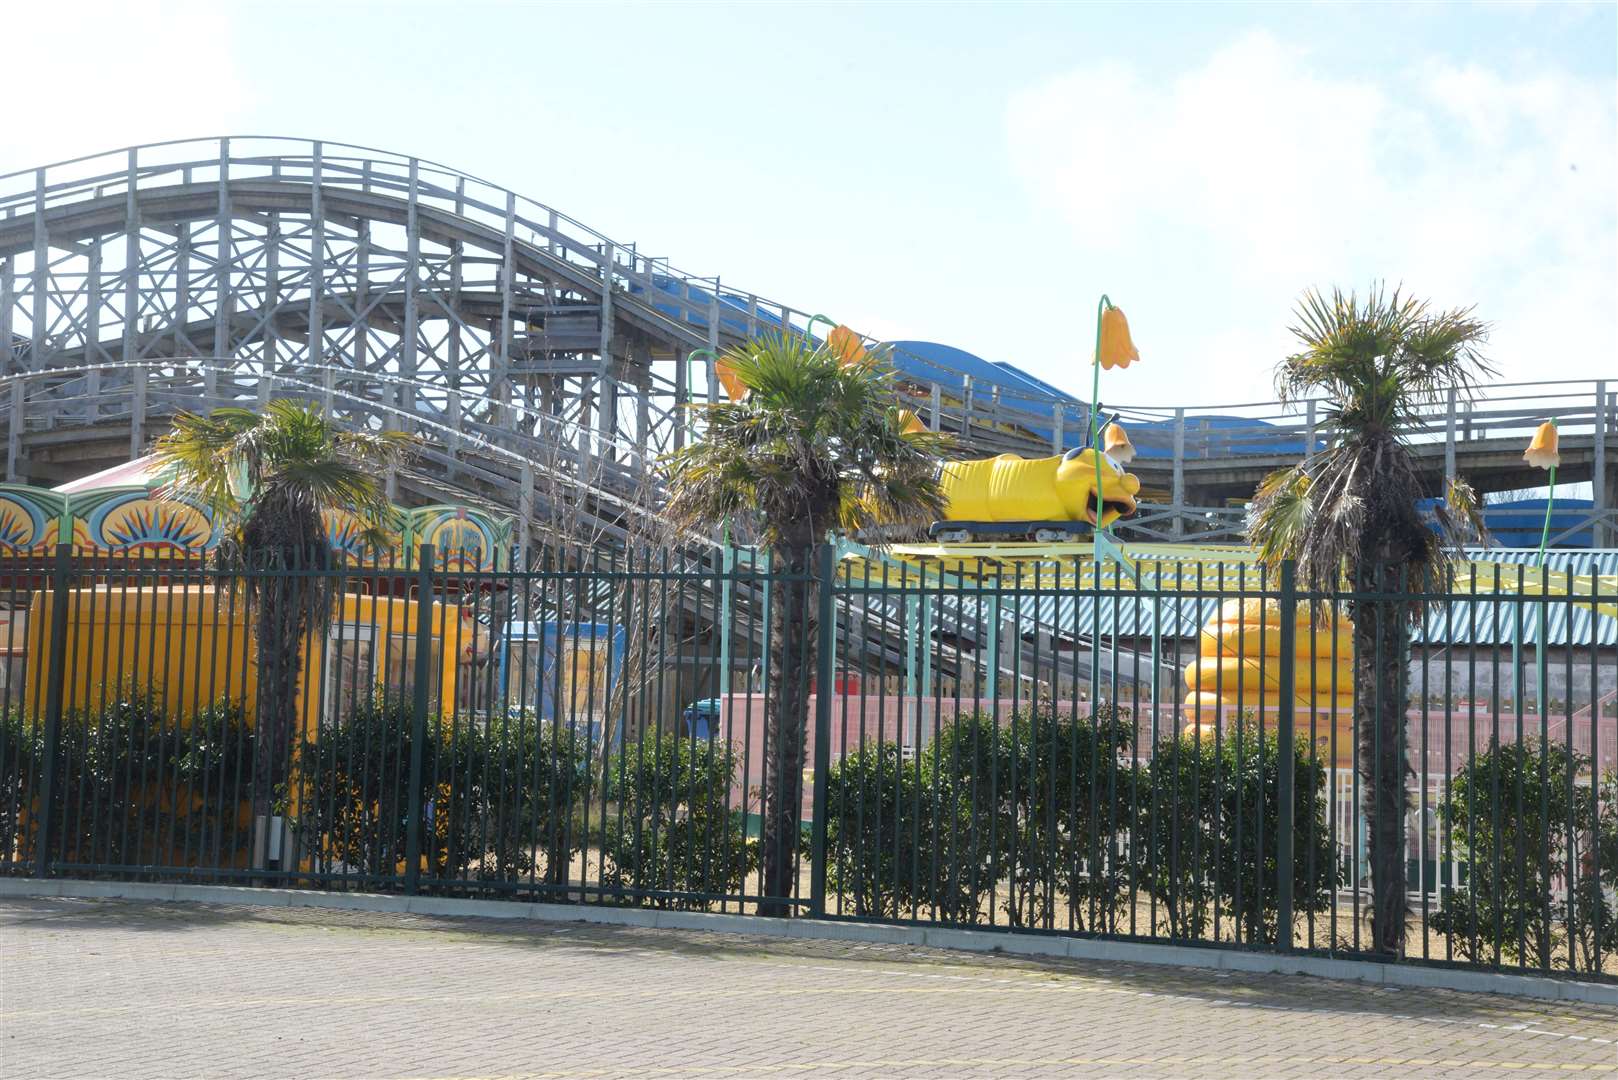 Margate's Dreamland amusement park is closed due to Covid-19. Picture: Chris Davey